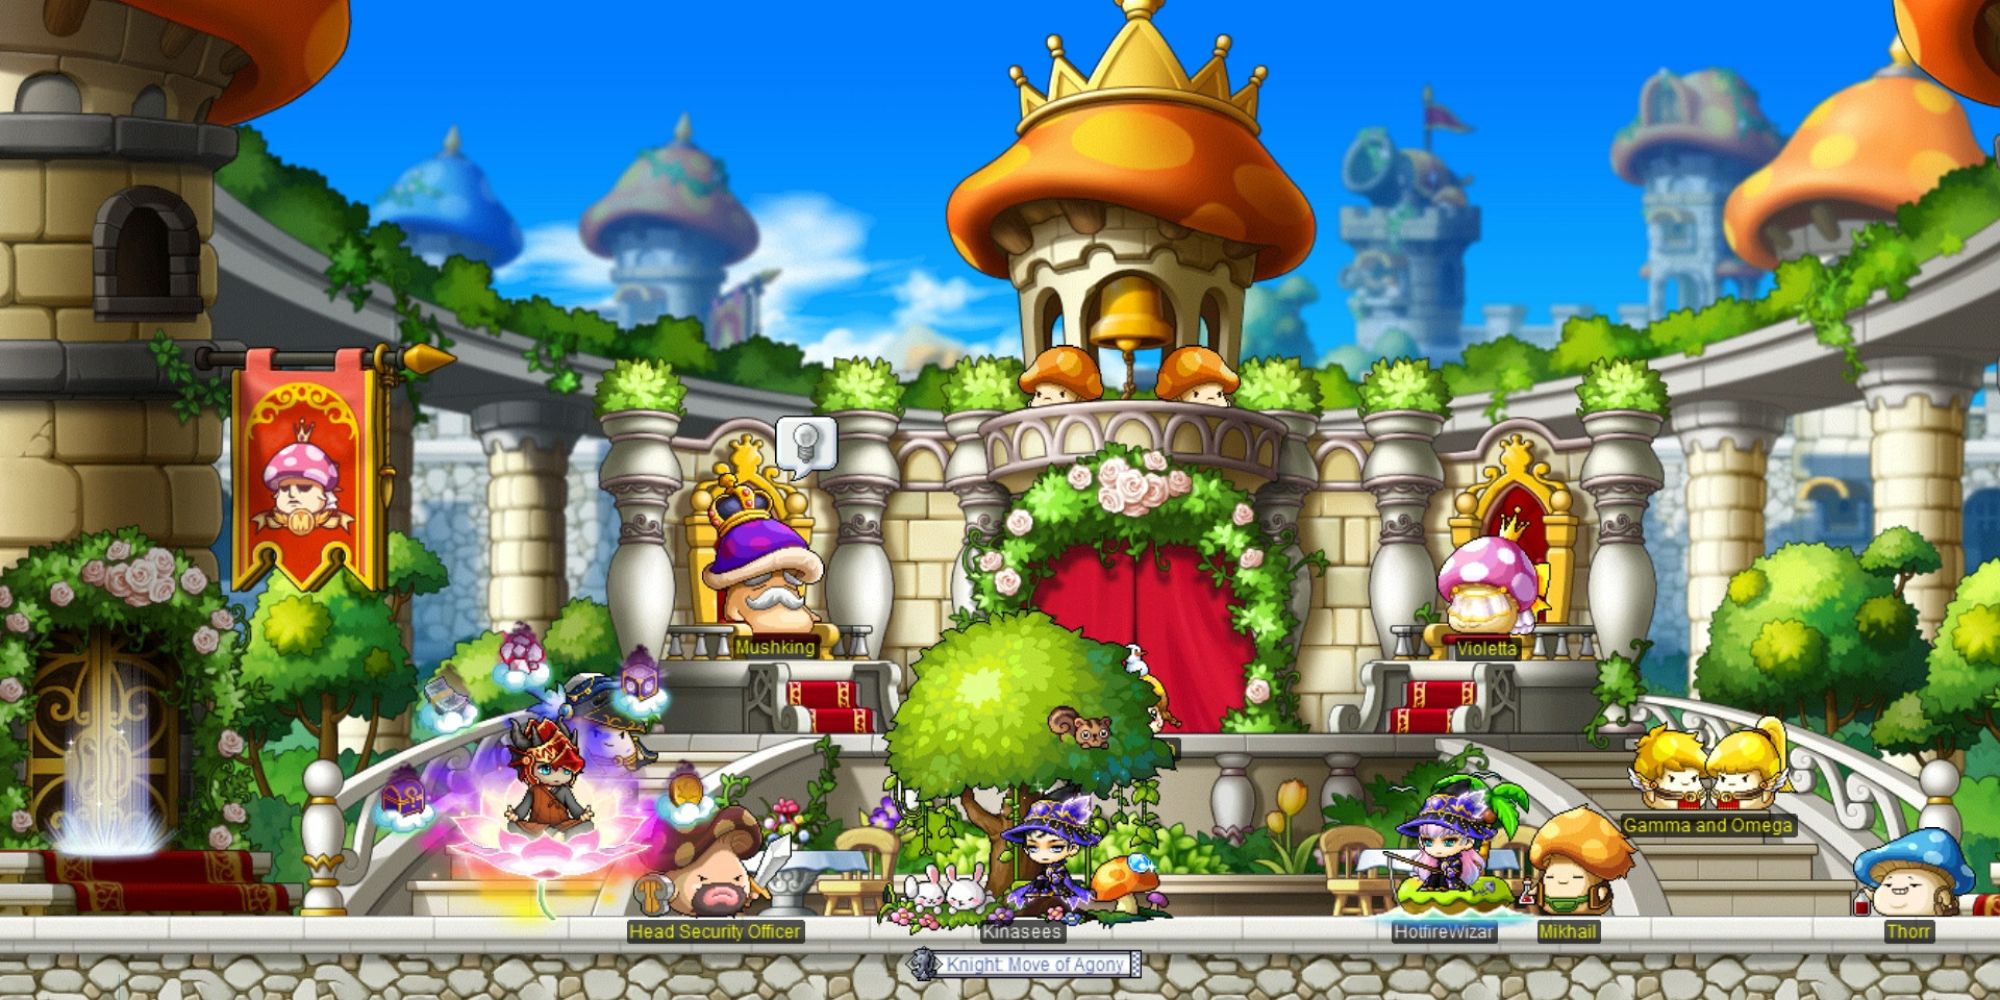 An image showcasing characters from MapleStory